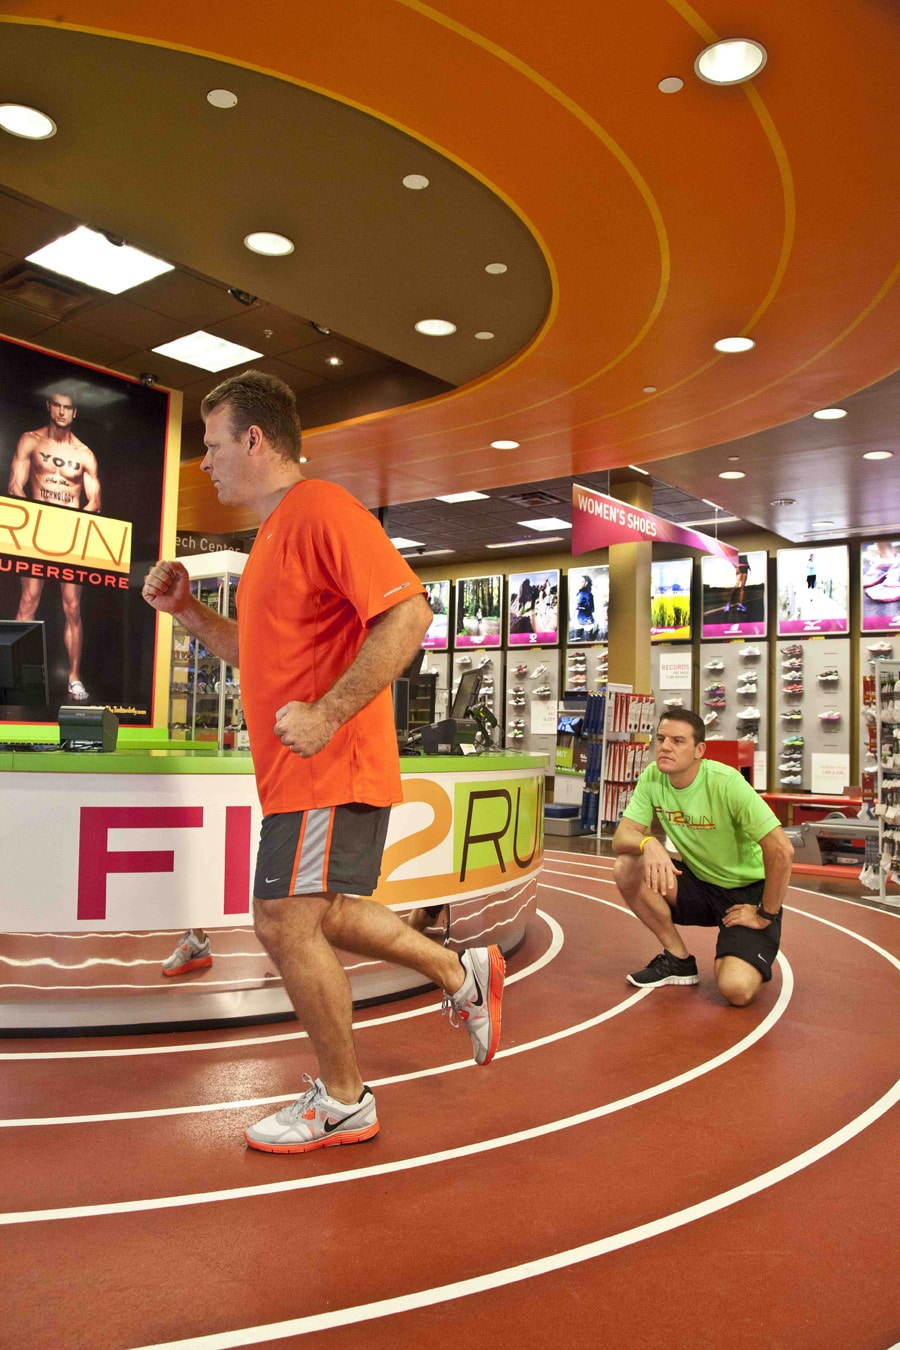 Fit2run Is Racing To A New Location At Downtown Disney At Walt Disney World Resort Disney Parks Blog